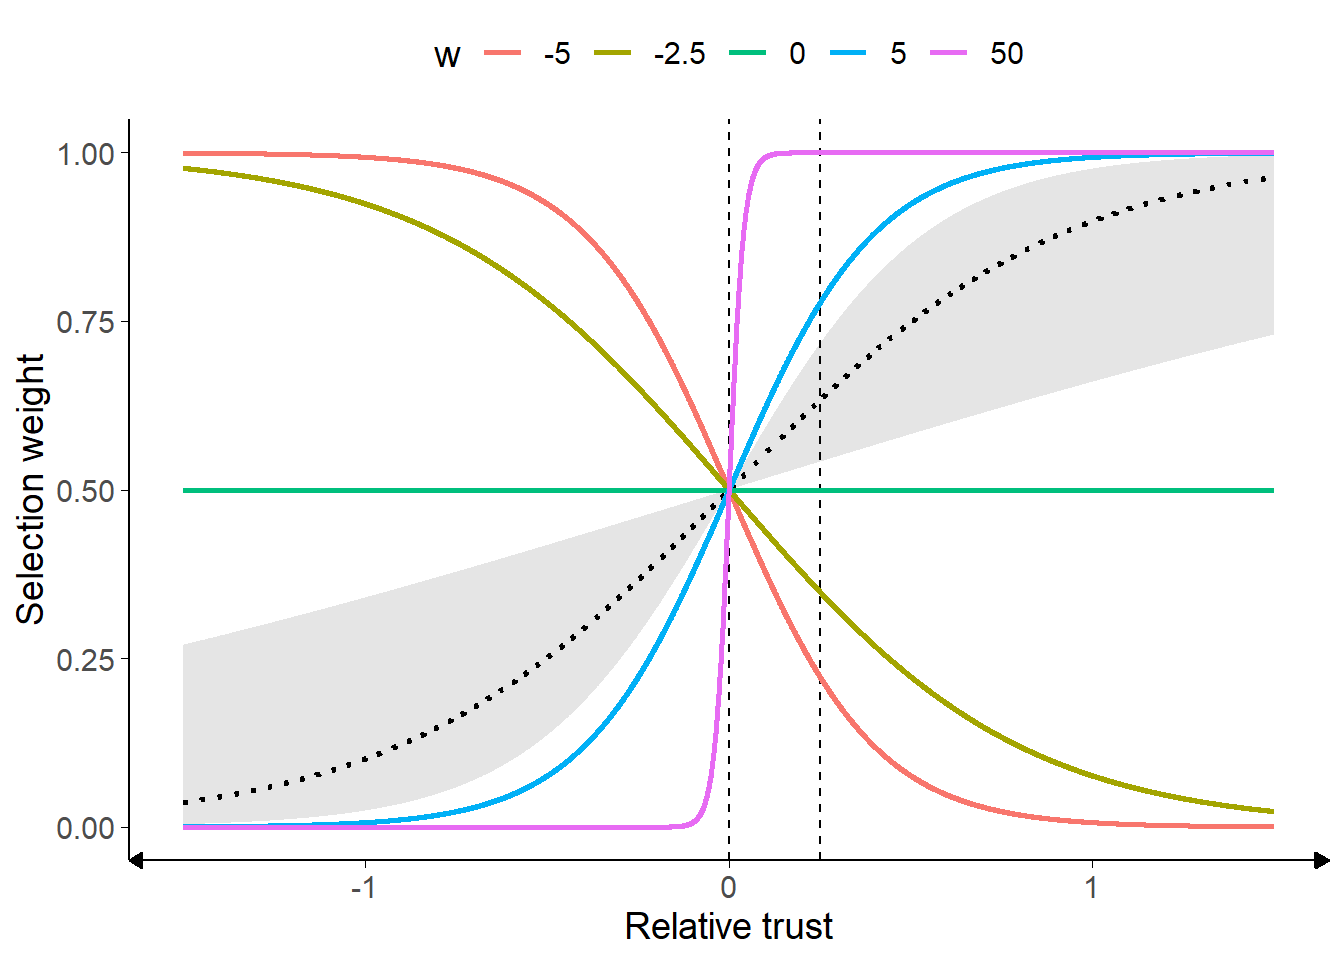 Weighted selection parameter.<br/> Example values of weighted selection are shown. For postive values of w, as relative trust increases, the selection weight also increases. Correspondingly, for negative values of w the selection weight decreases as trust increases. Compare the intercepts with the dashed lines: all seleciton weights are 0.5 where relative trust is zero, equating to random picking between equivalently-weighted advisors. Where w is 0 (green line), relative trust differences make no difference to selection weighting. Where it is large (purple line), on the other hand, relatively small differences in relative trust translate into much greater selection weighting.<br/> The dotted line and shaded area represent the sigmoids calculated using the mean empirical value and its 95\% confidence limits.